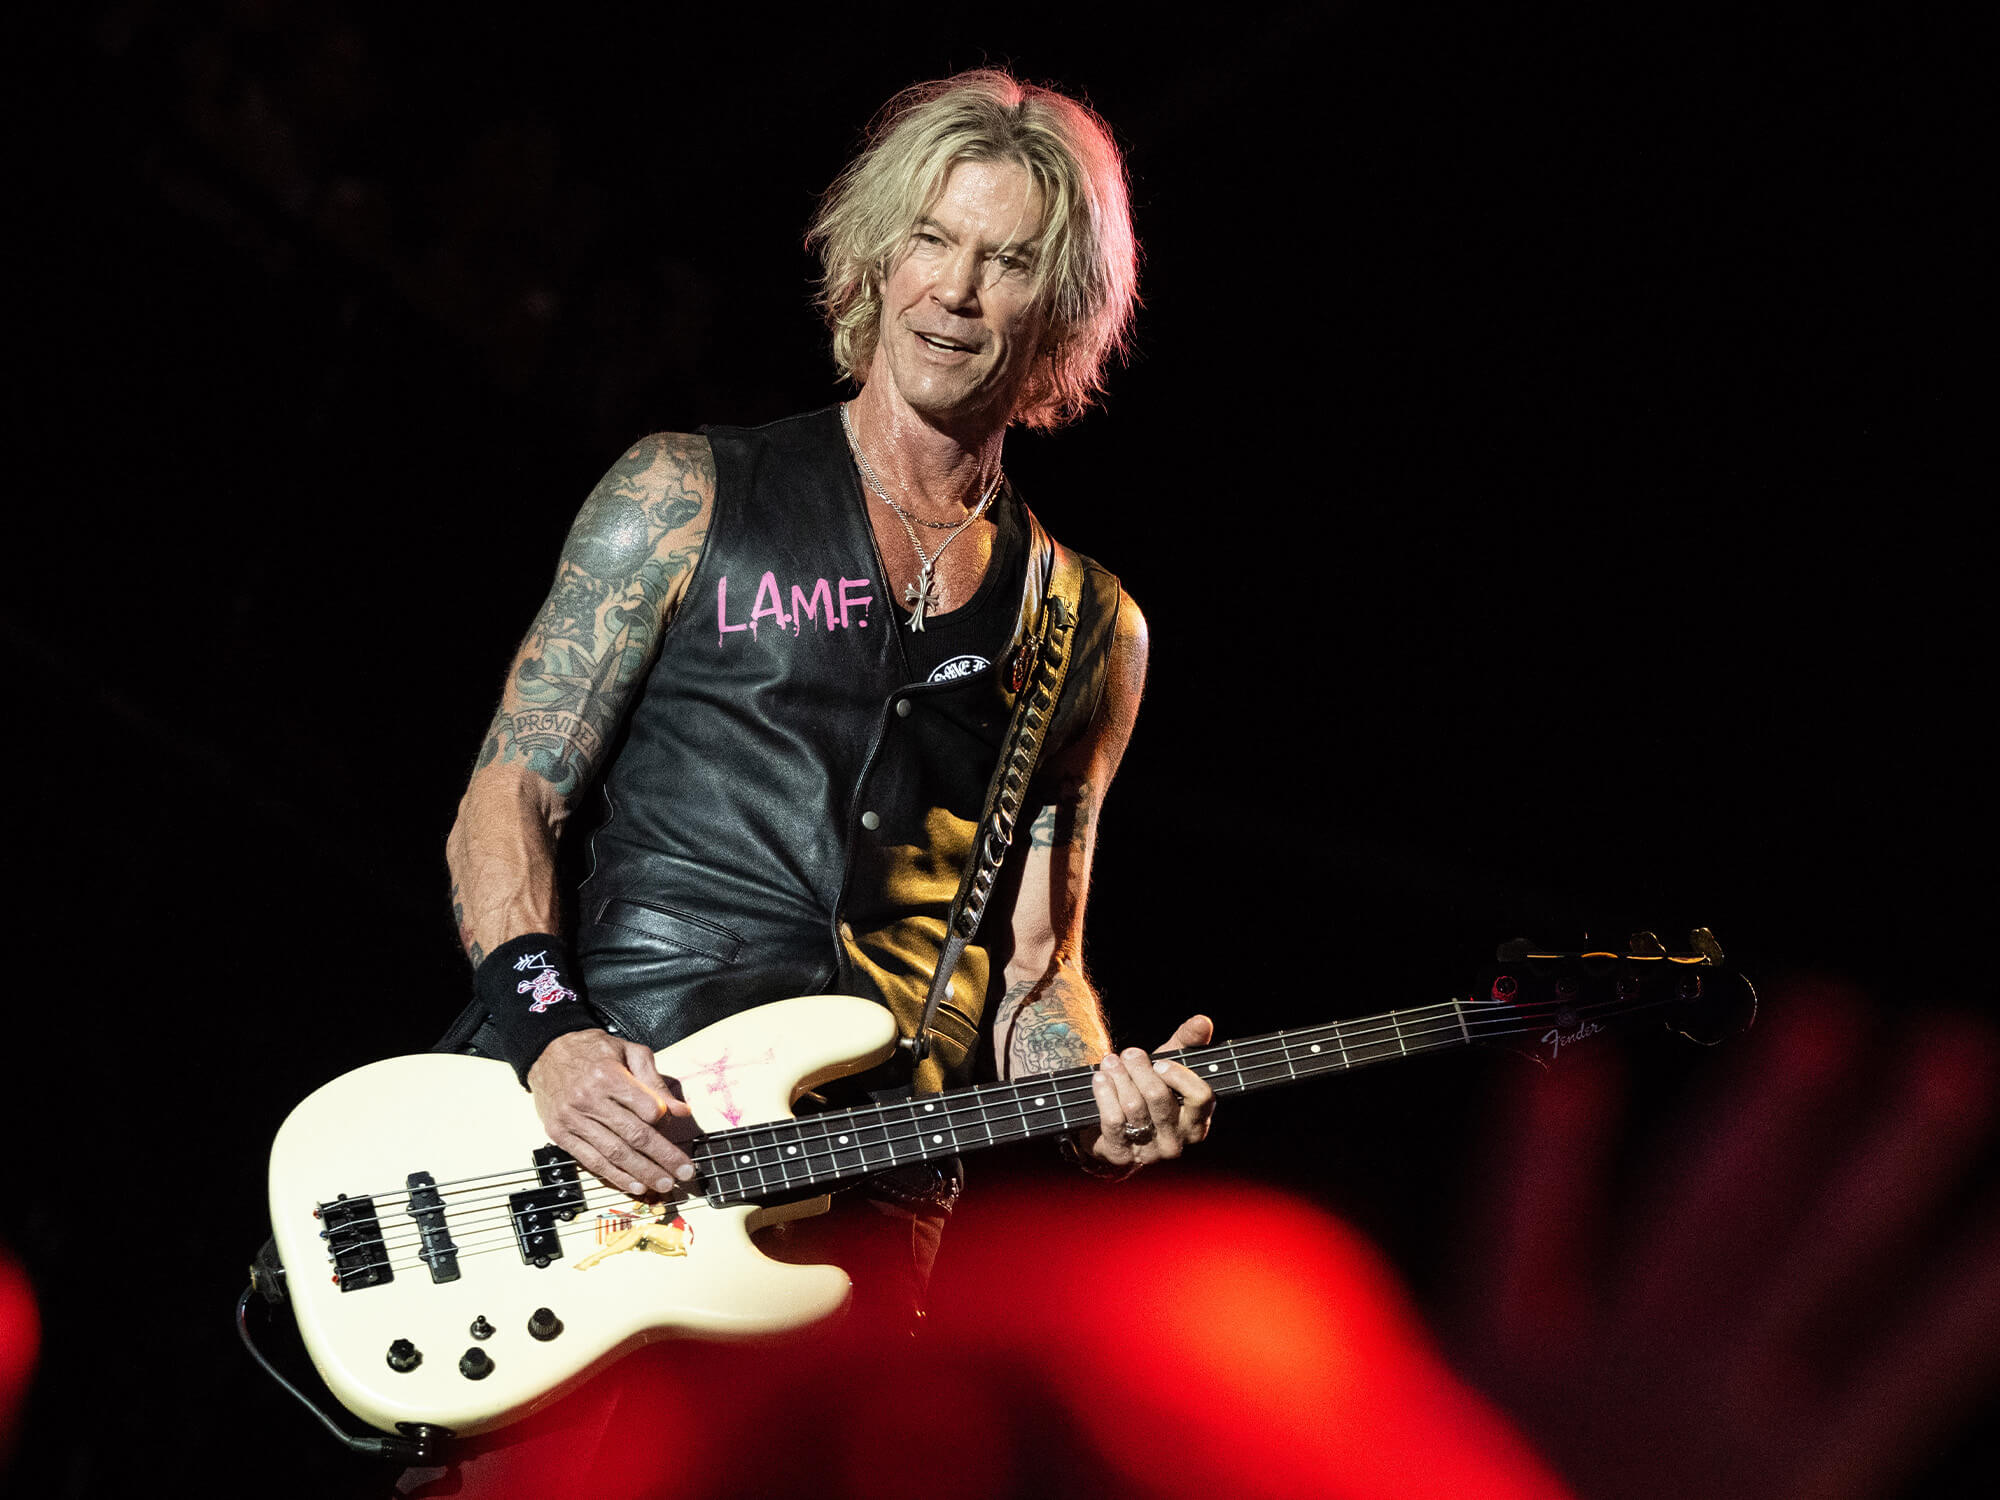 Duff McKagan with his bass guitar on stage at Glastonbury.